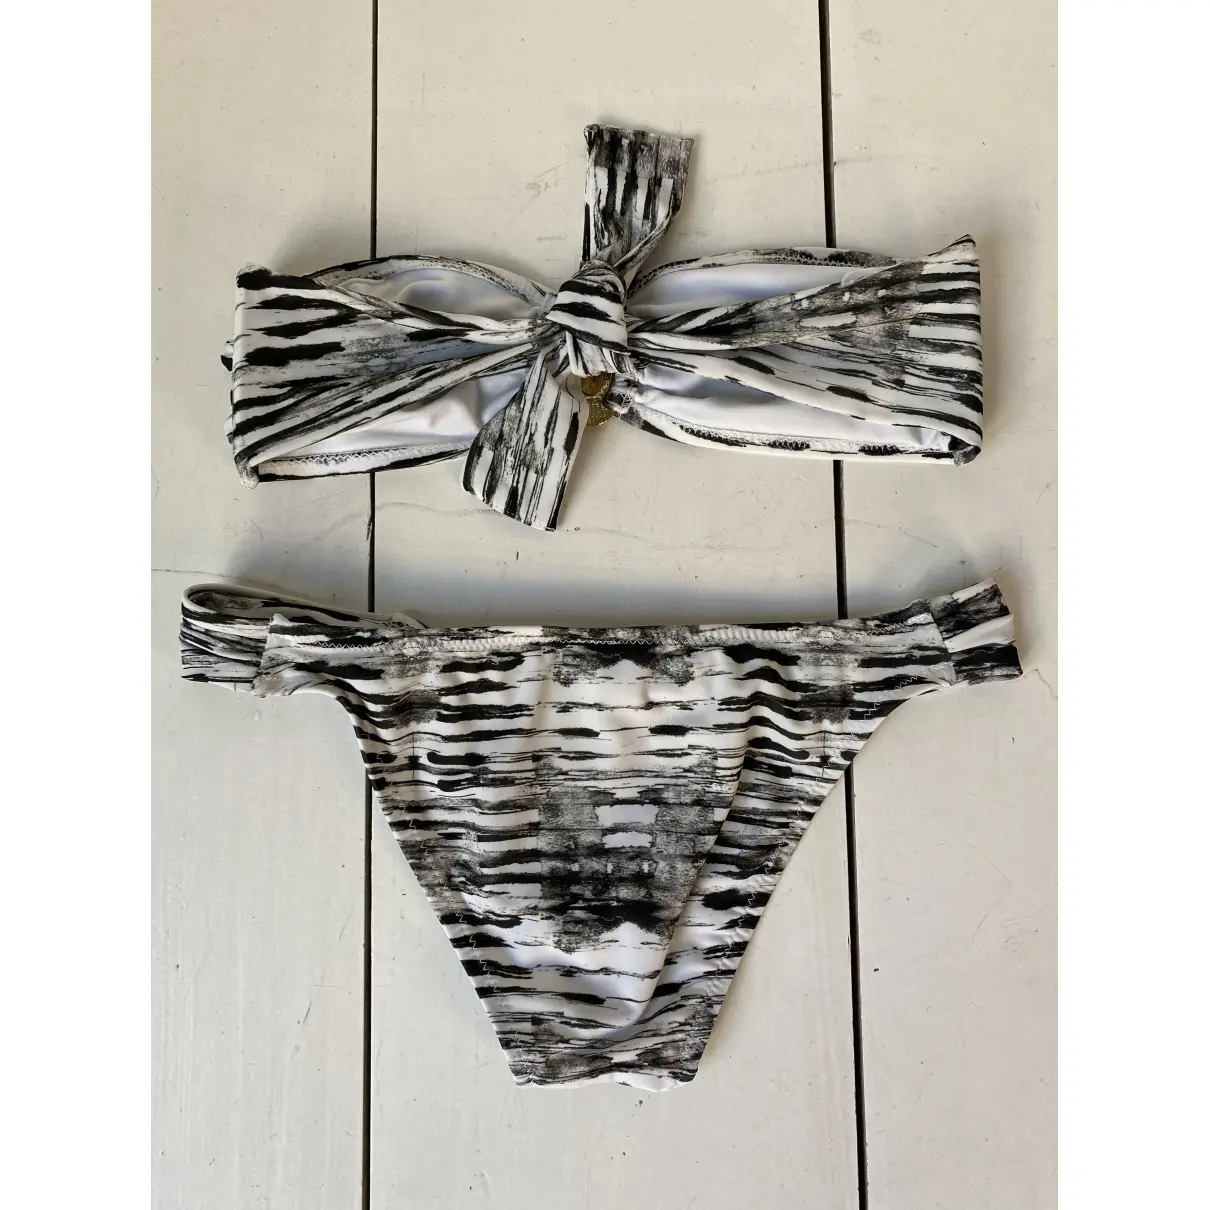 Buy Varley Two-piece swimsuit online